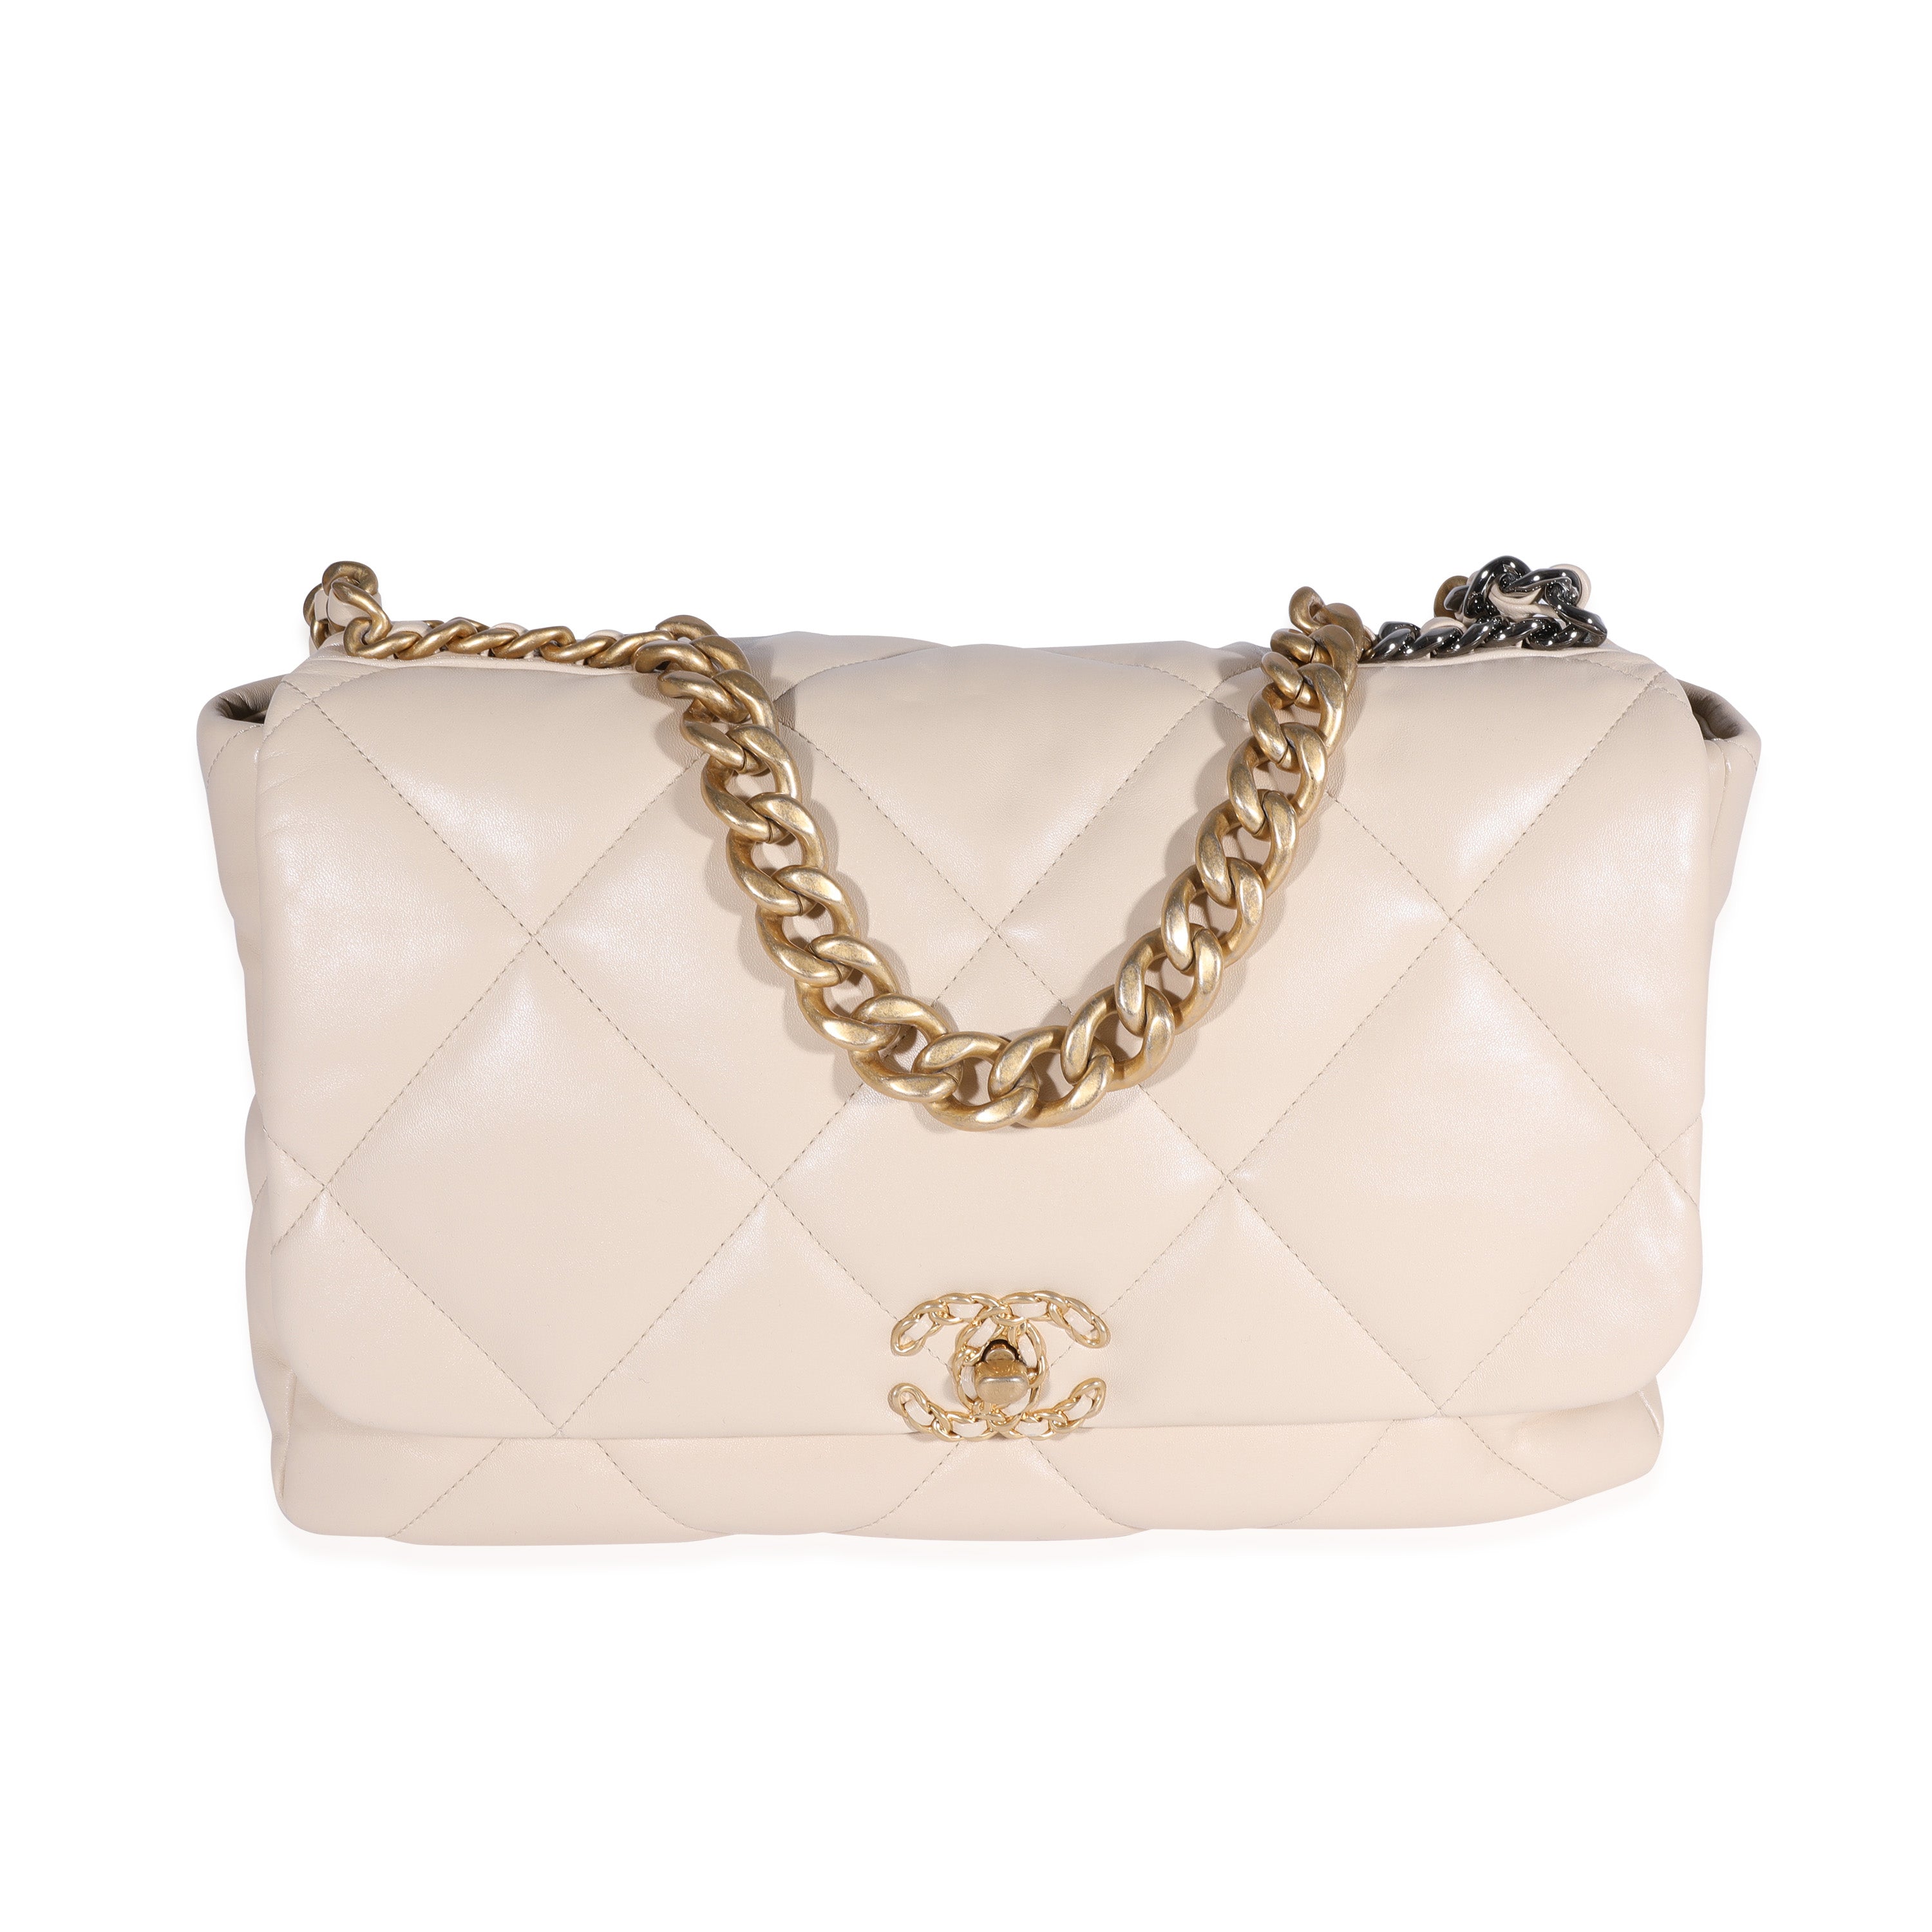 Chanel Beige Quilted Lambskin Chanel 19 Maxi Flap Bag, myGemma